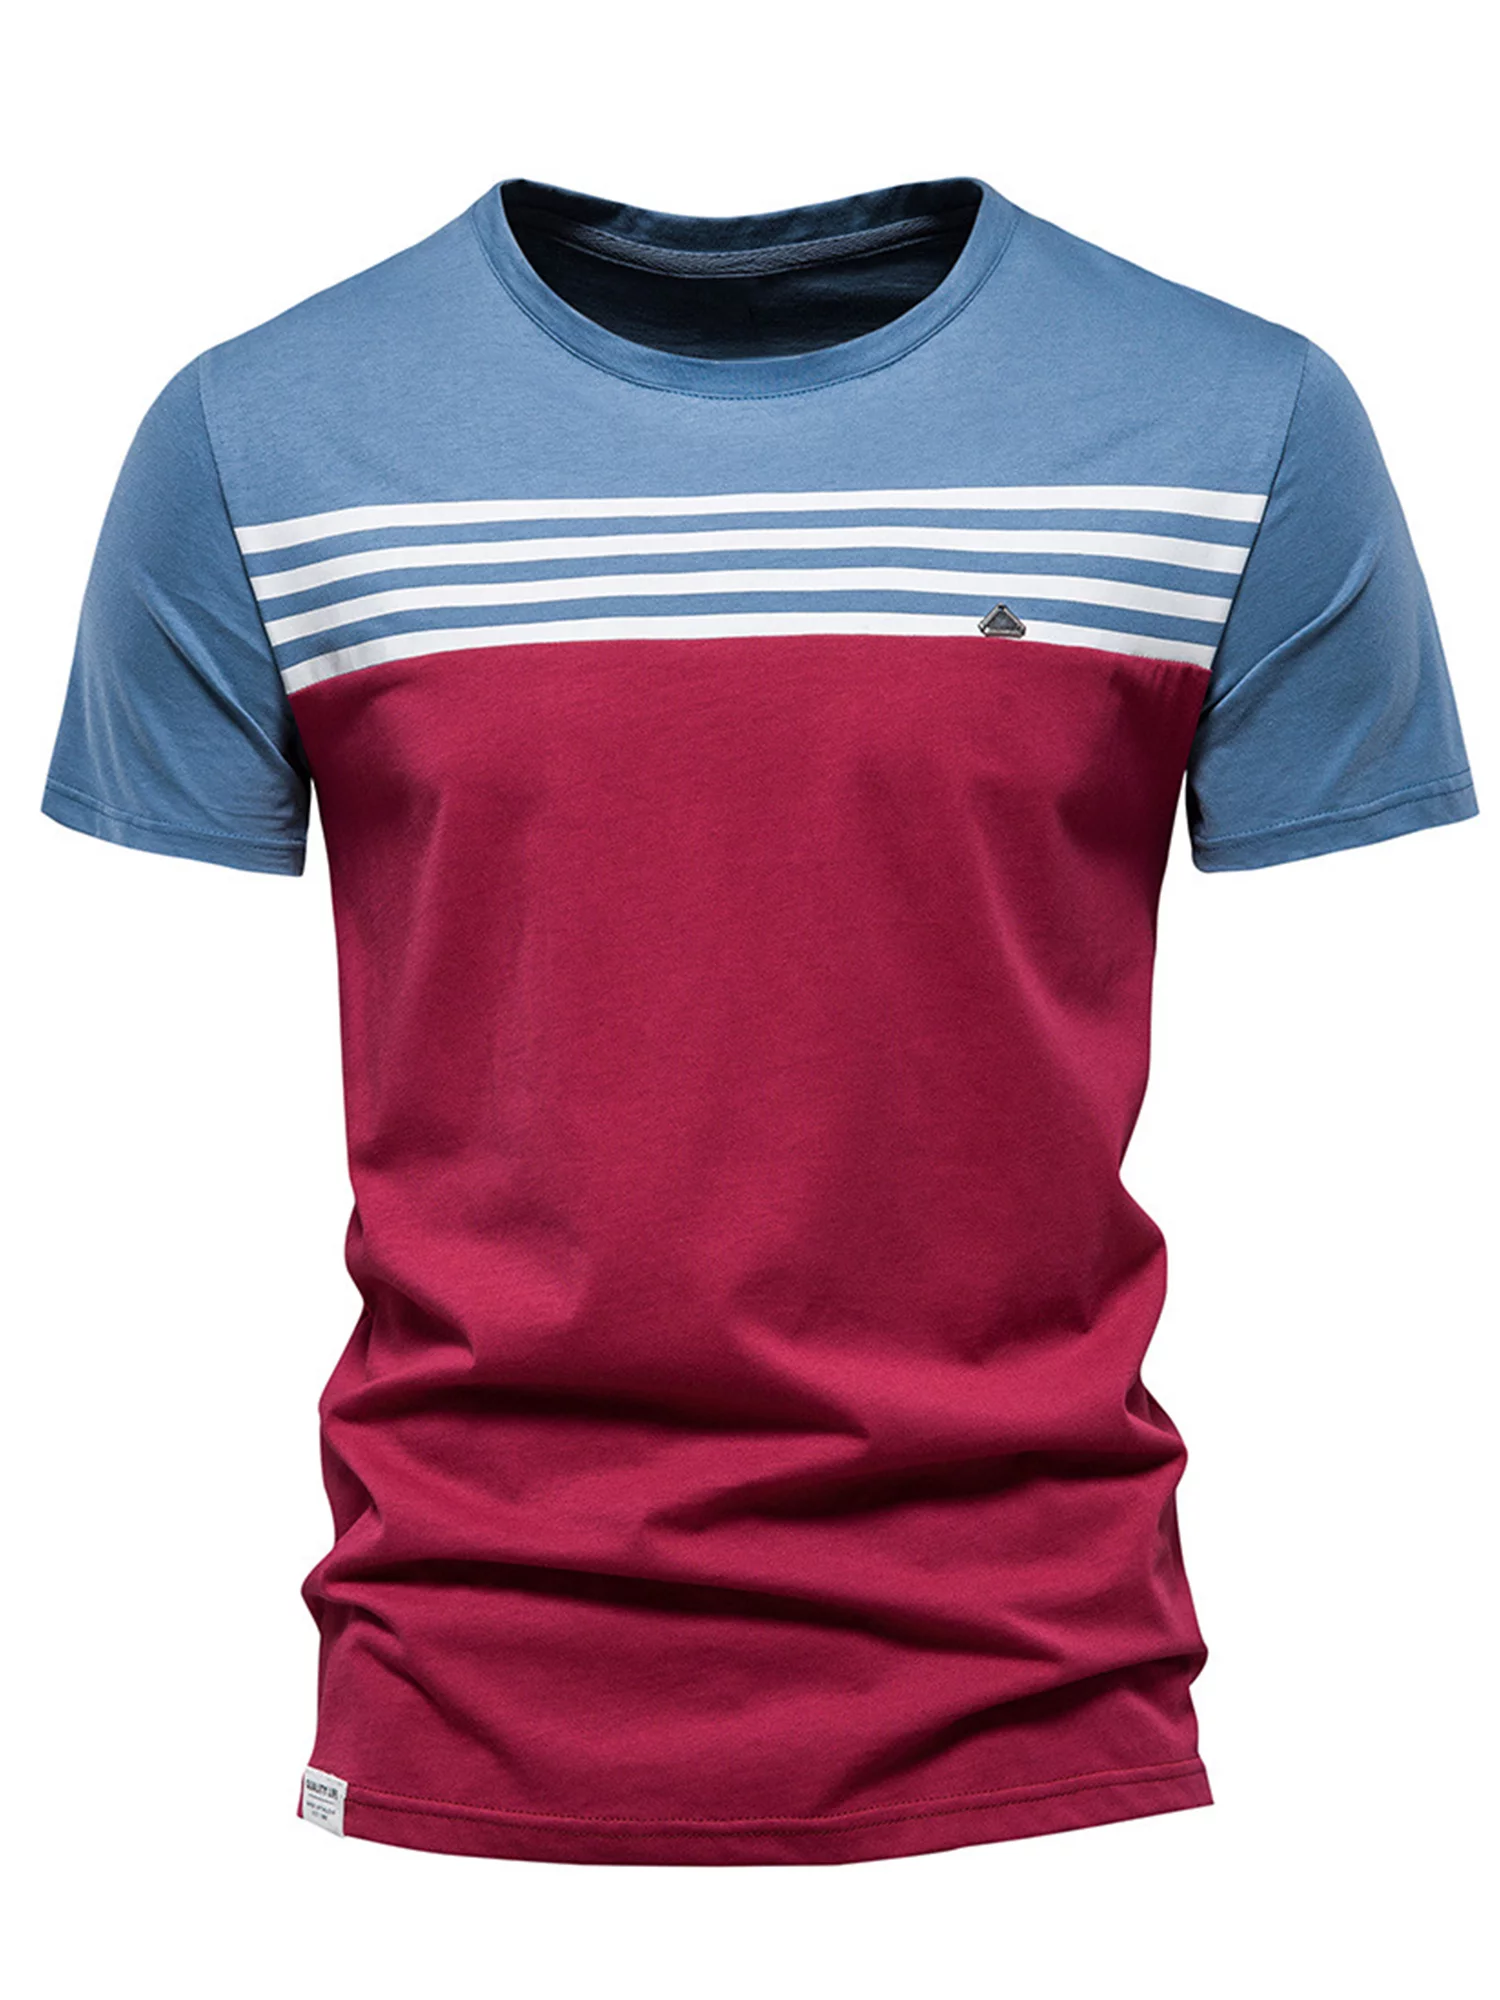 Wholesale Mens Casual T Shirt Supplier In Uk